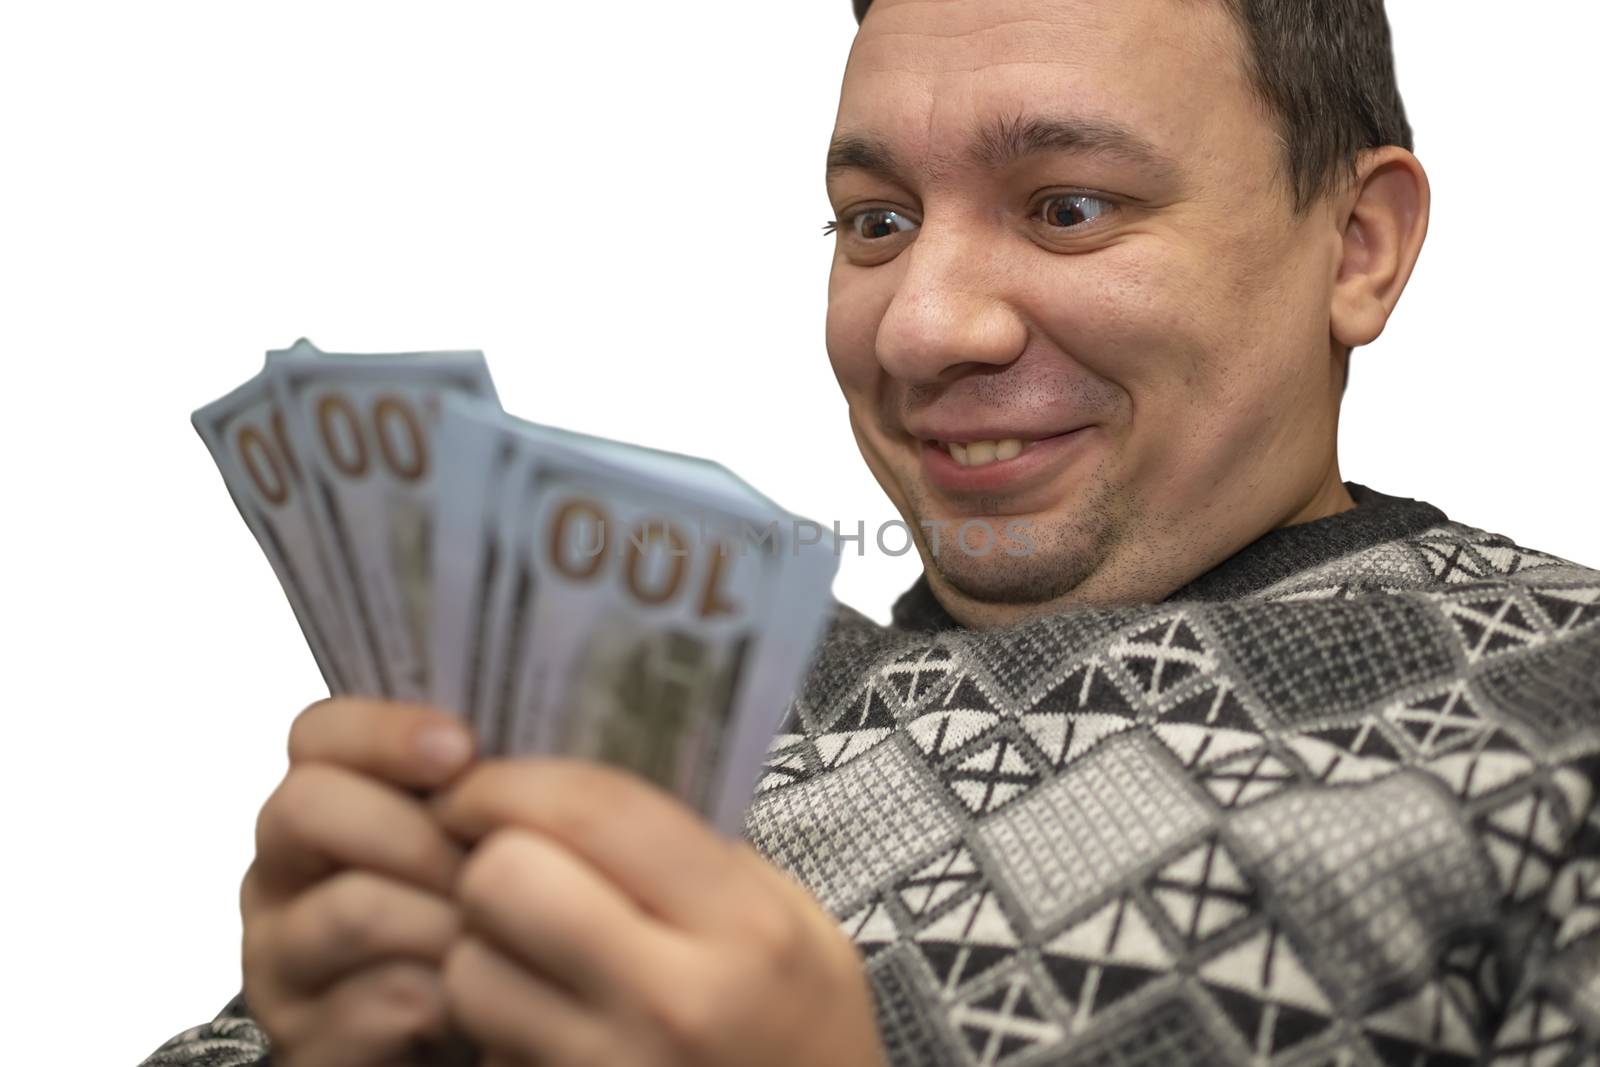 abnormal, crazy face of a man who holds money by jk3030